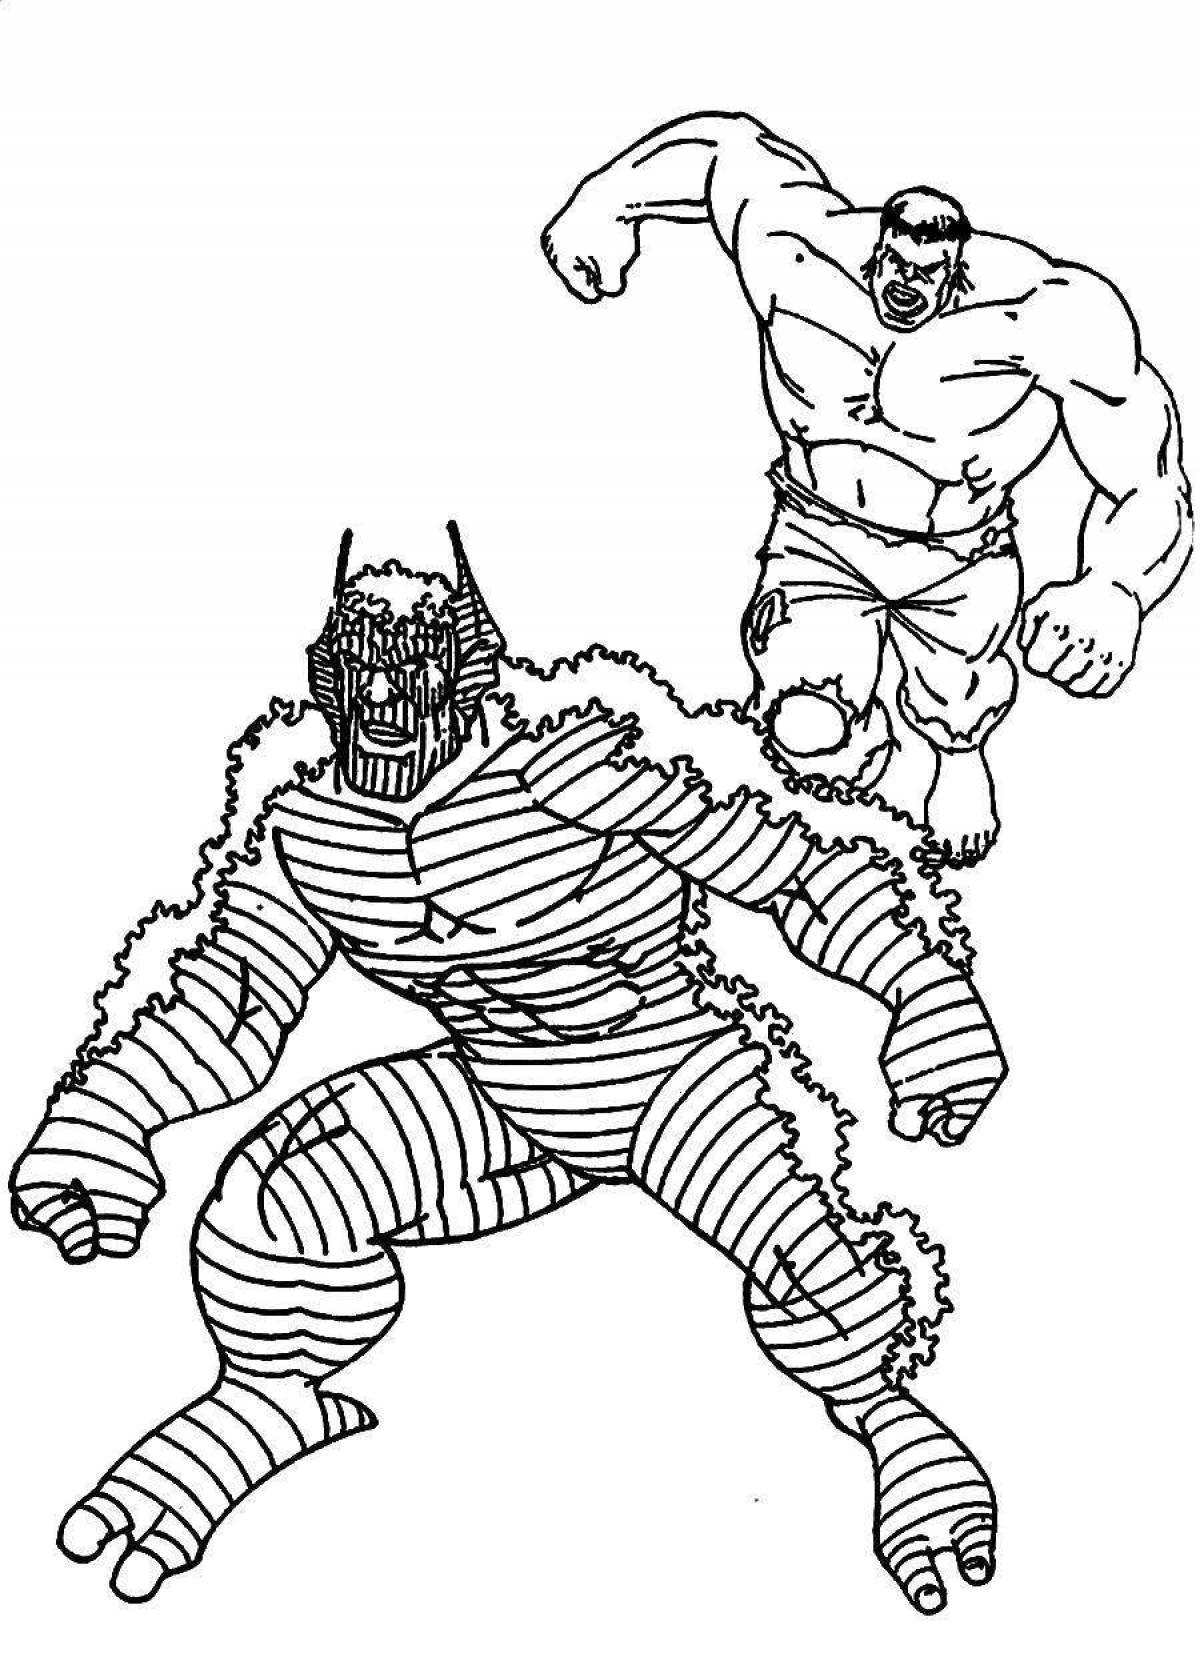 The incredible abomination marvel coloring page